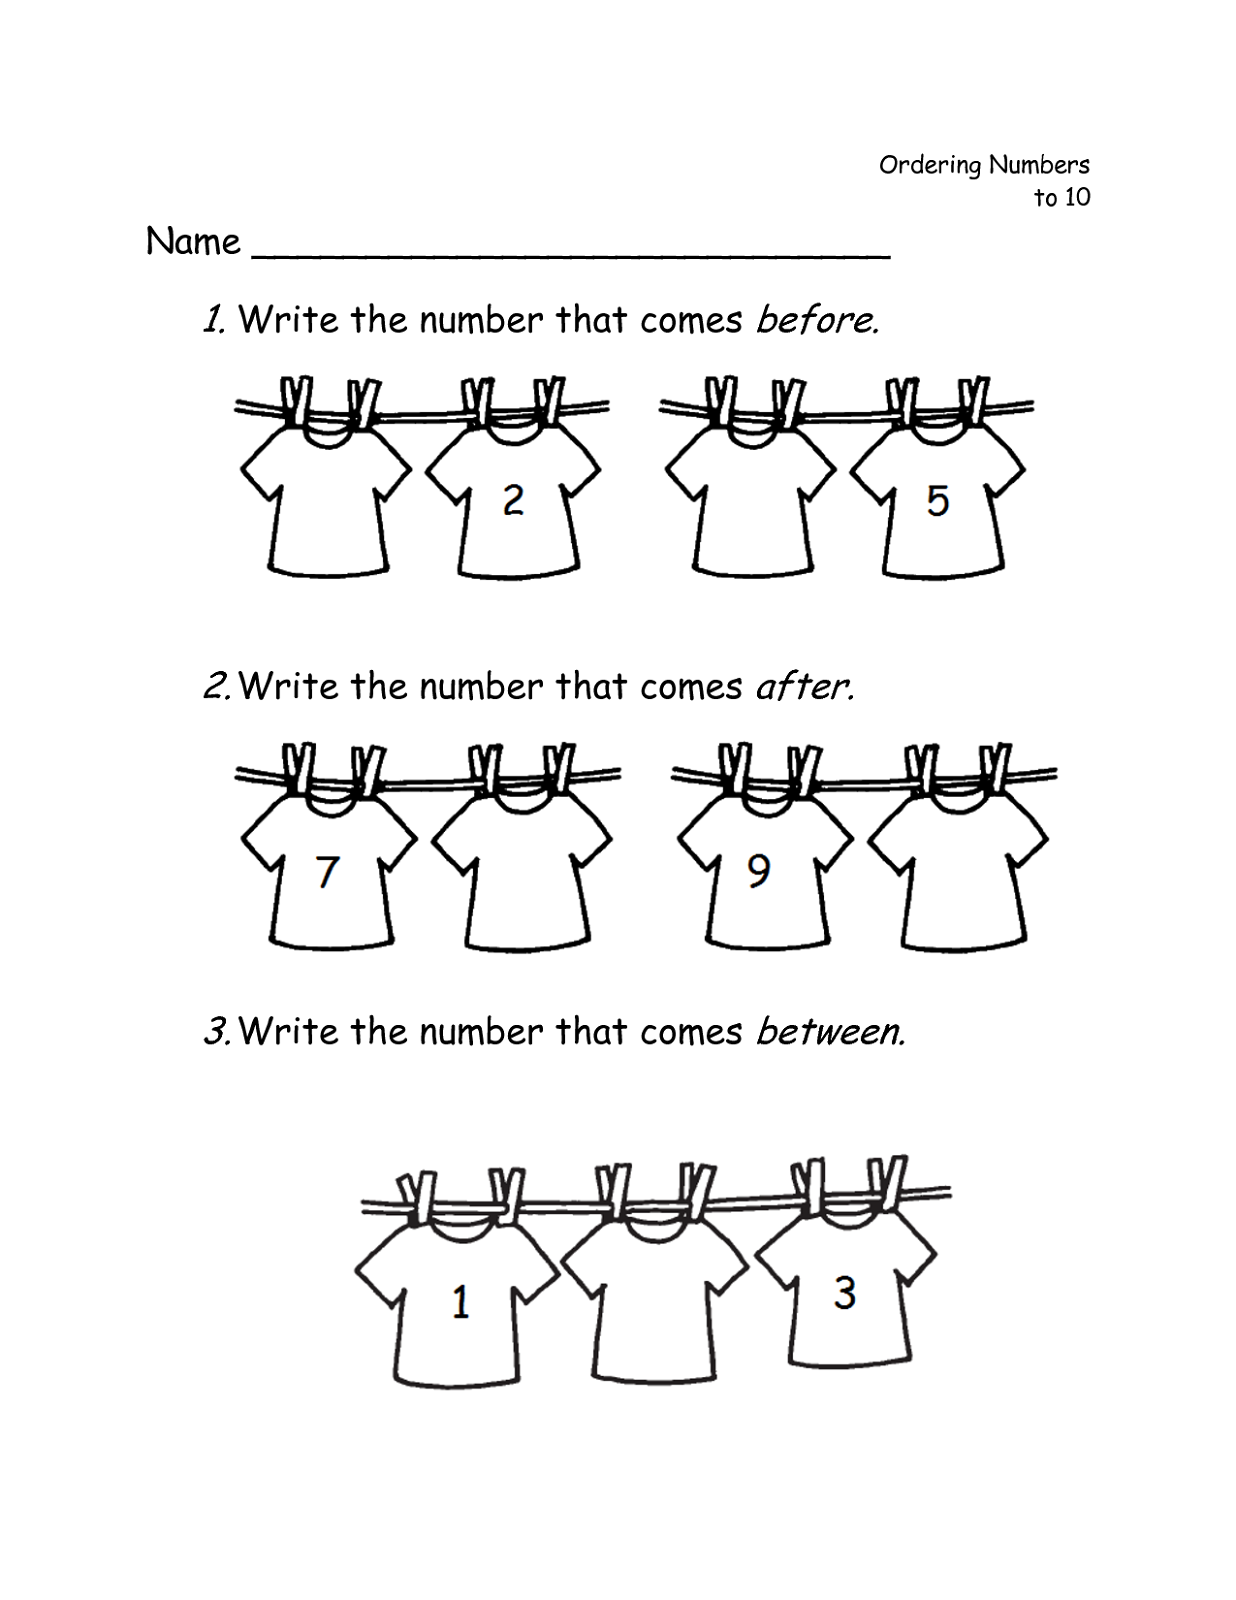 before-and-after-numbers-spring-math-worksheets-and-activities-for